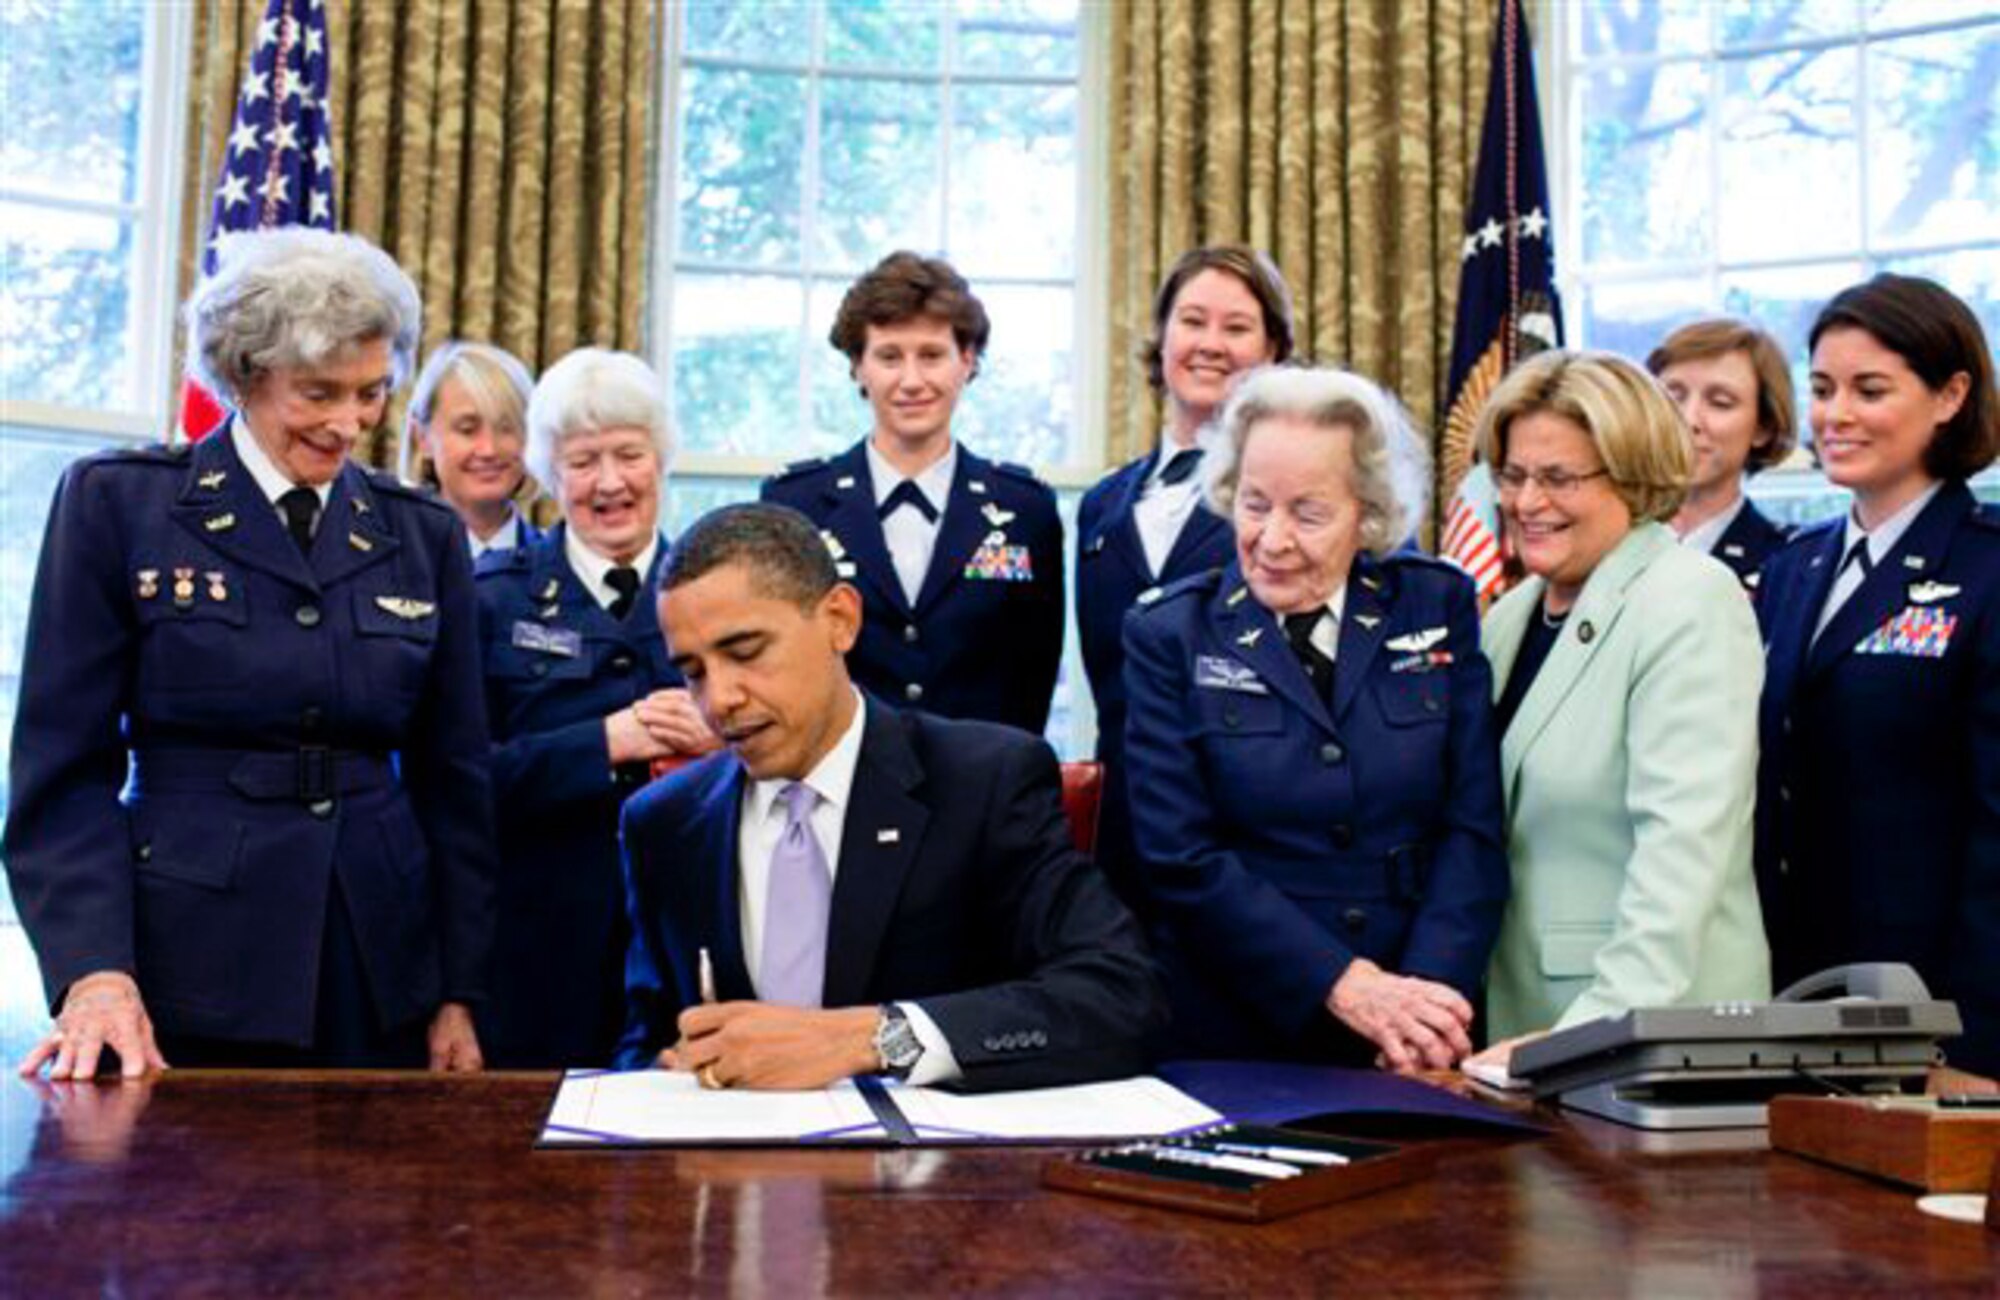 President Barack Obama signs S.614 in the Oval Office July 1 at the White House. The bill awards a Congressional Gold Medal to Women Airforce Service Pilots. The WASP program was established during World War II, and from 1942 to 1943, more than 1,000 women joined, flying 60 million miles of noncombat military missions. Of the women who received their wings as Women Airforce Service Pilots, approximately 300 are living today. (Official White House photo/Pete Souza)
